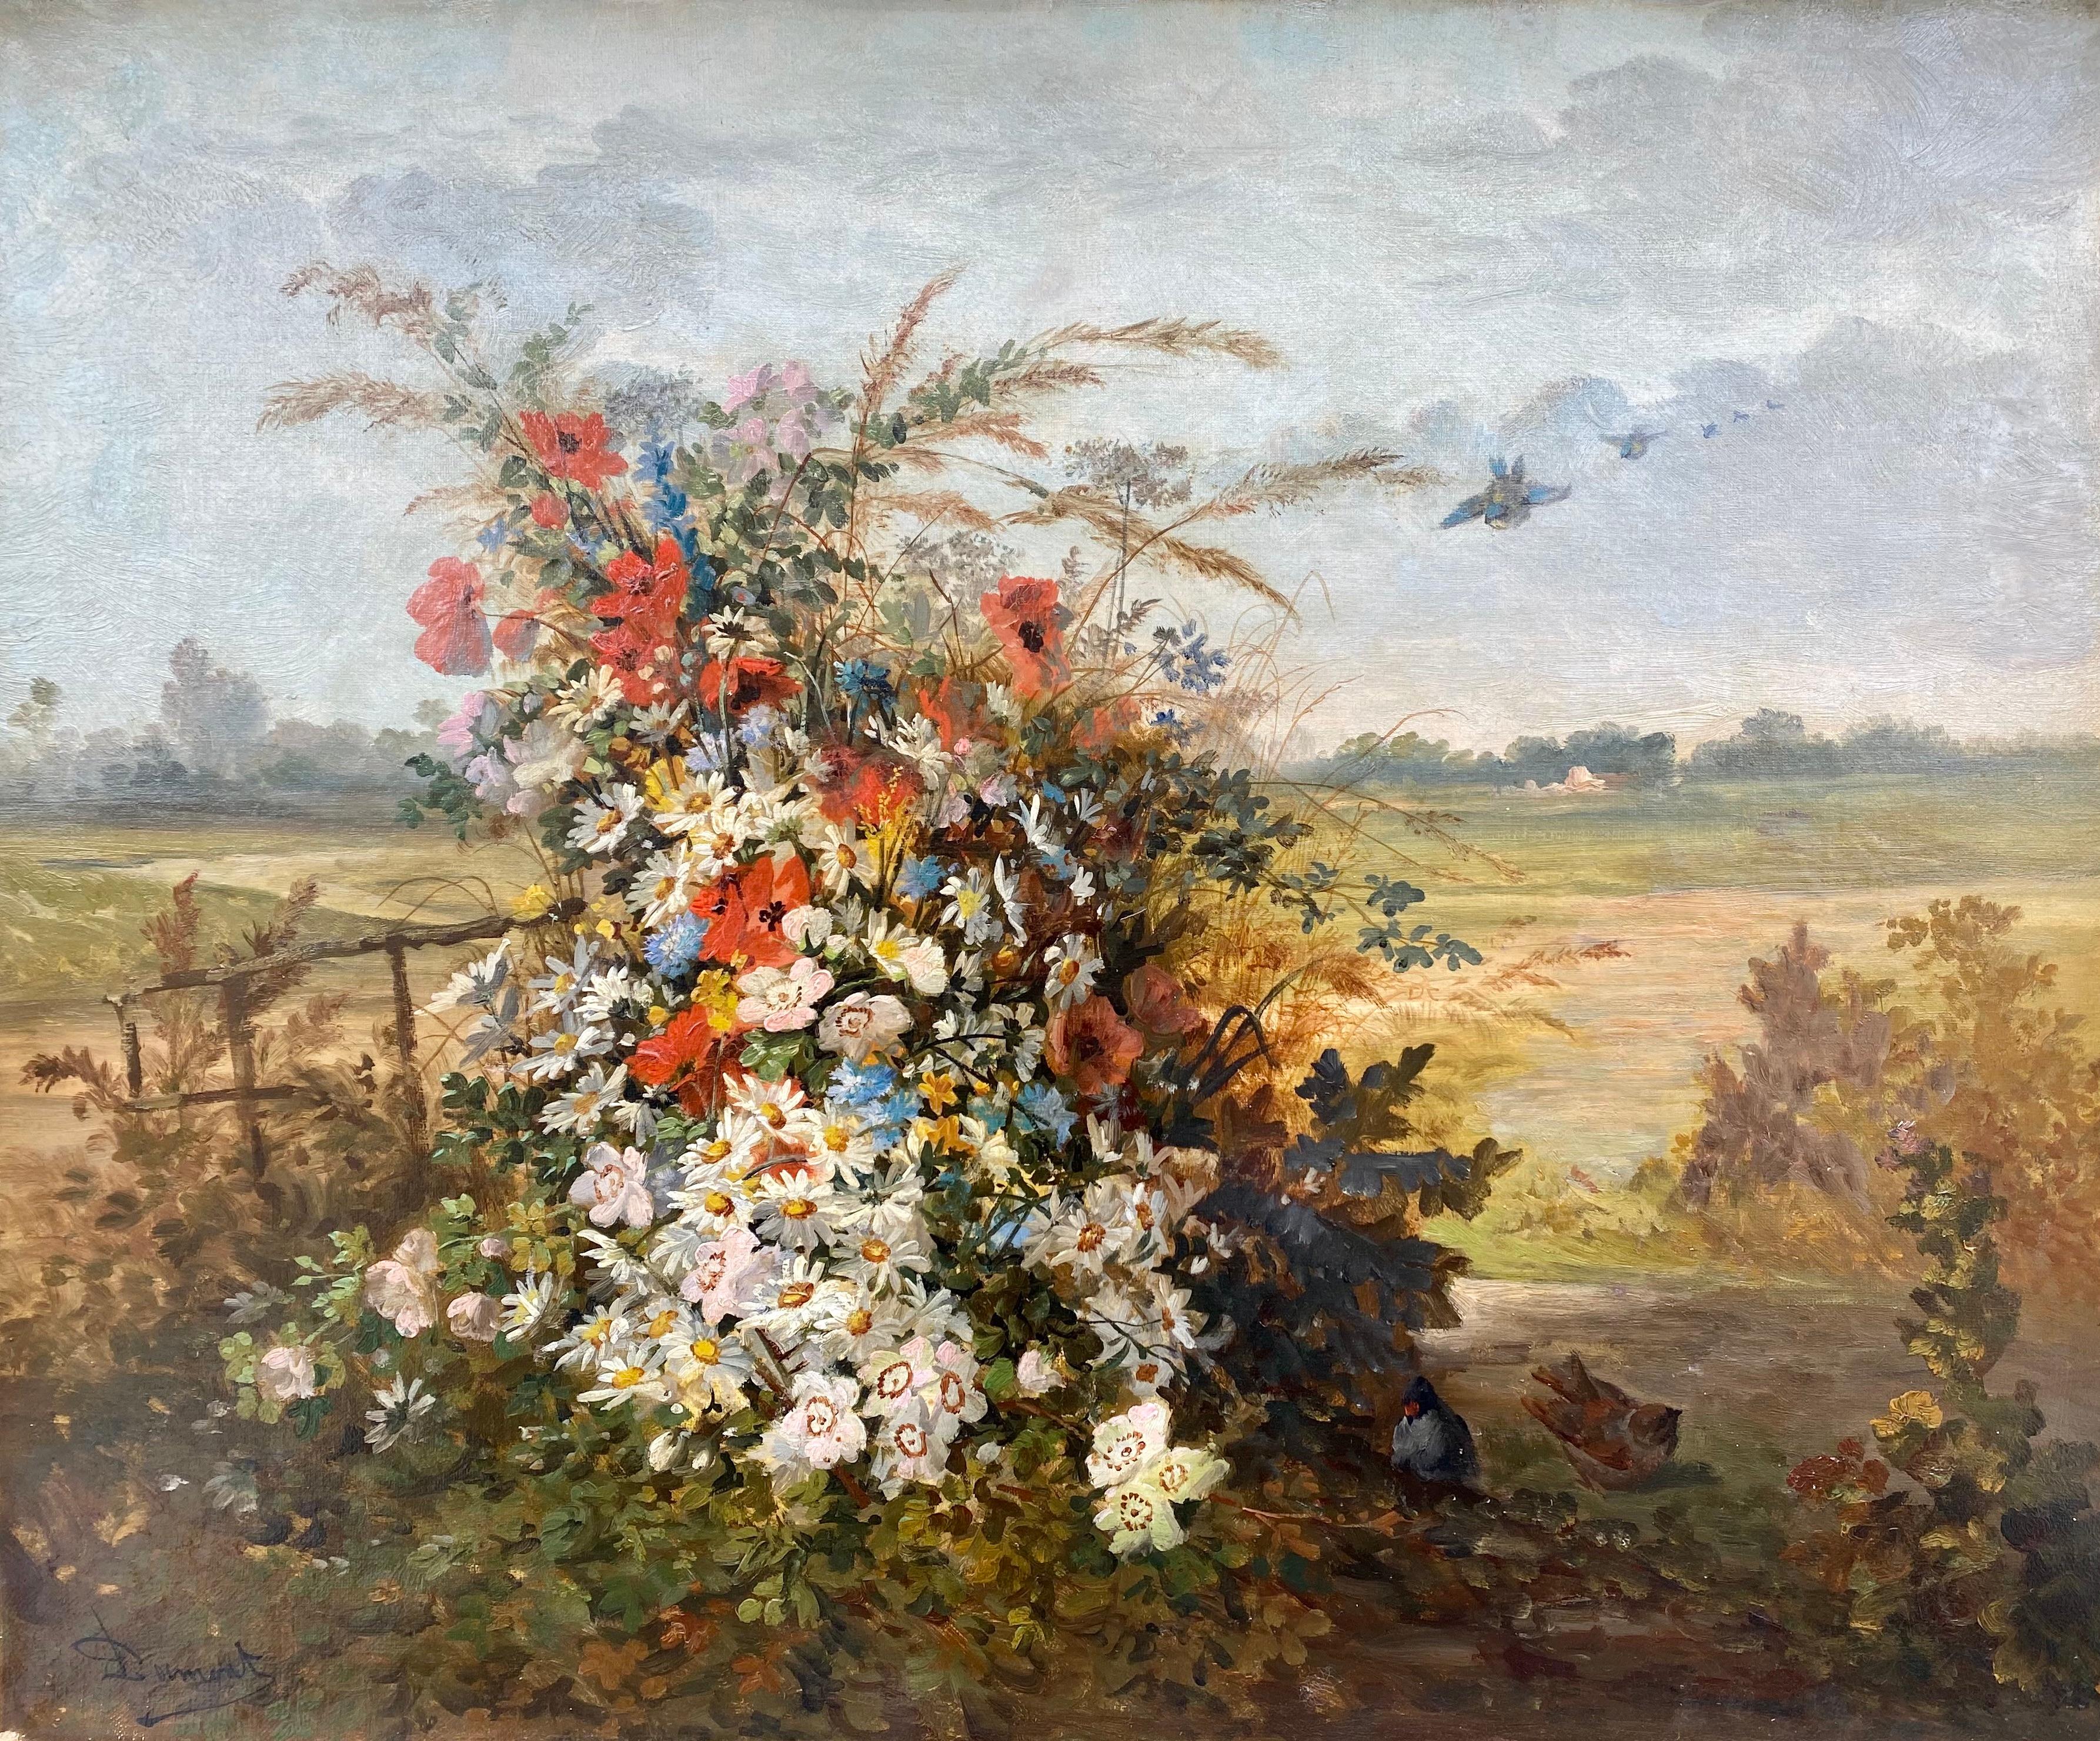 Field flowers: exuberant floral still life in a rustic landscape country scene - Painting by Jean Claude Dumont